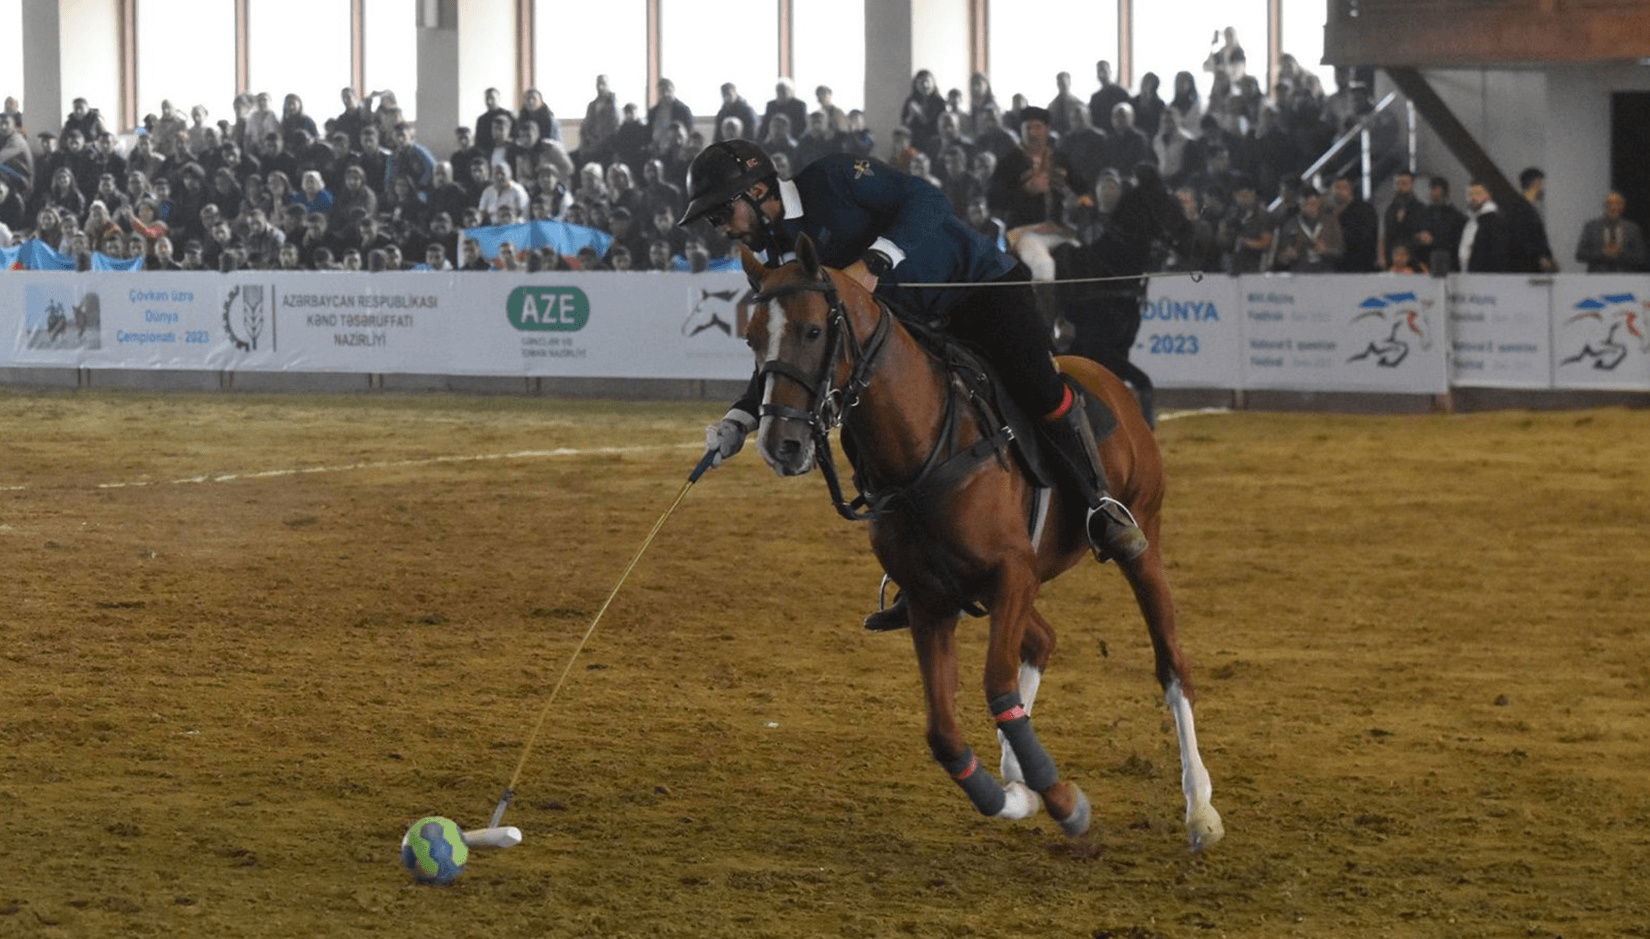 The National Equestrian Festival was Held in Baku